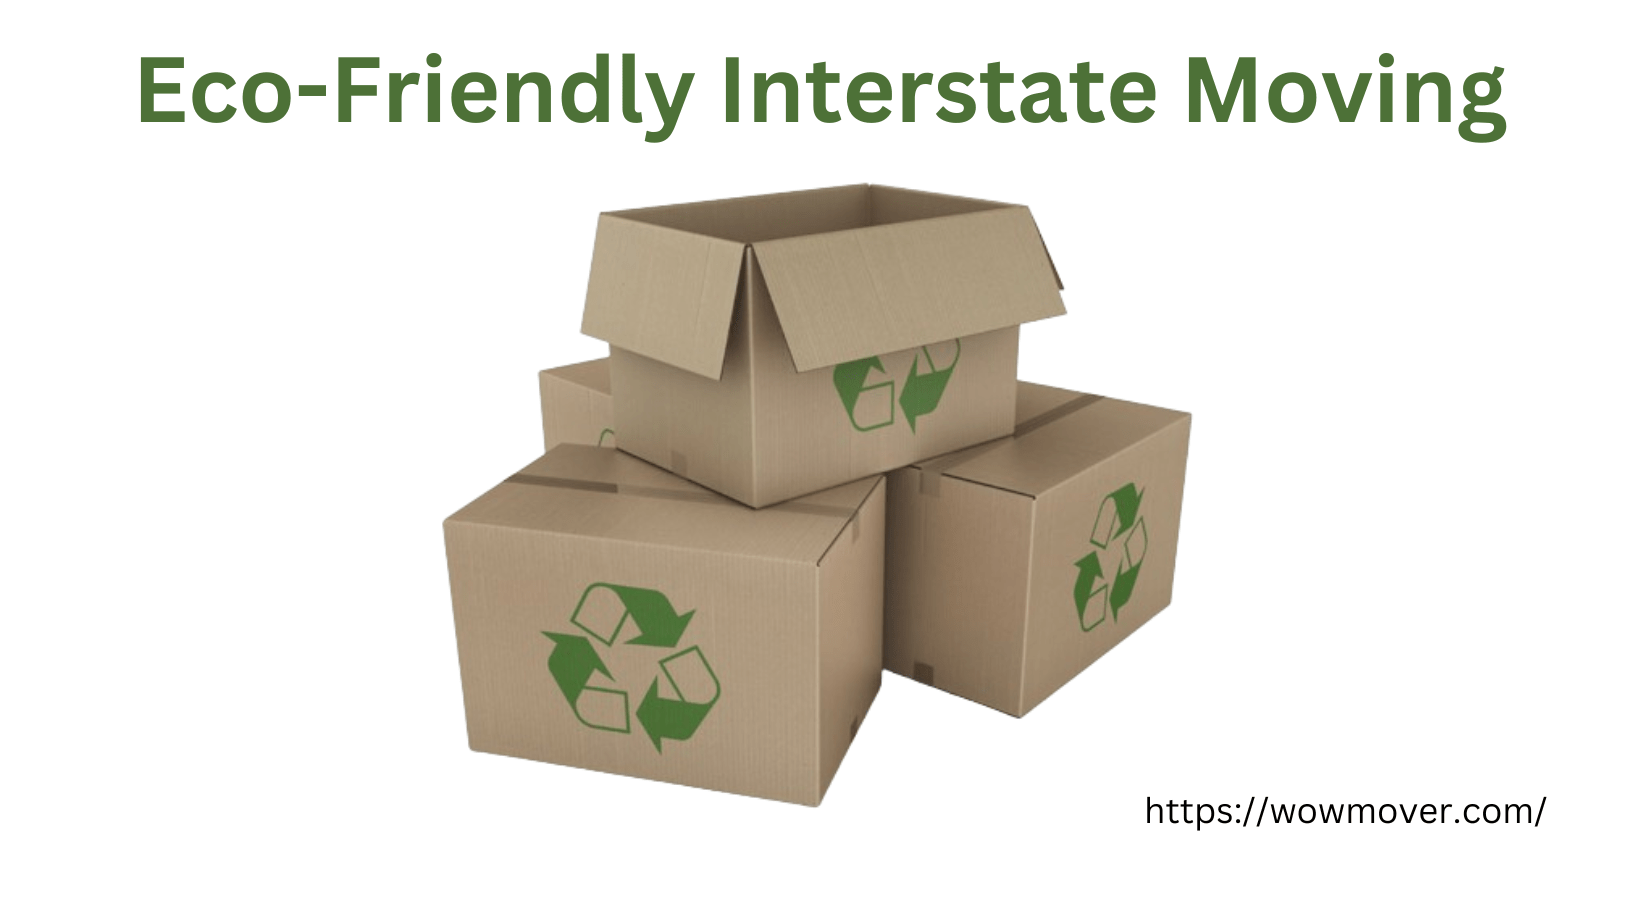 Eco-Friendly Interstate Moving: Sustainable Practices to Consider